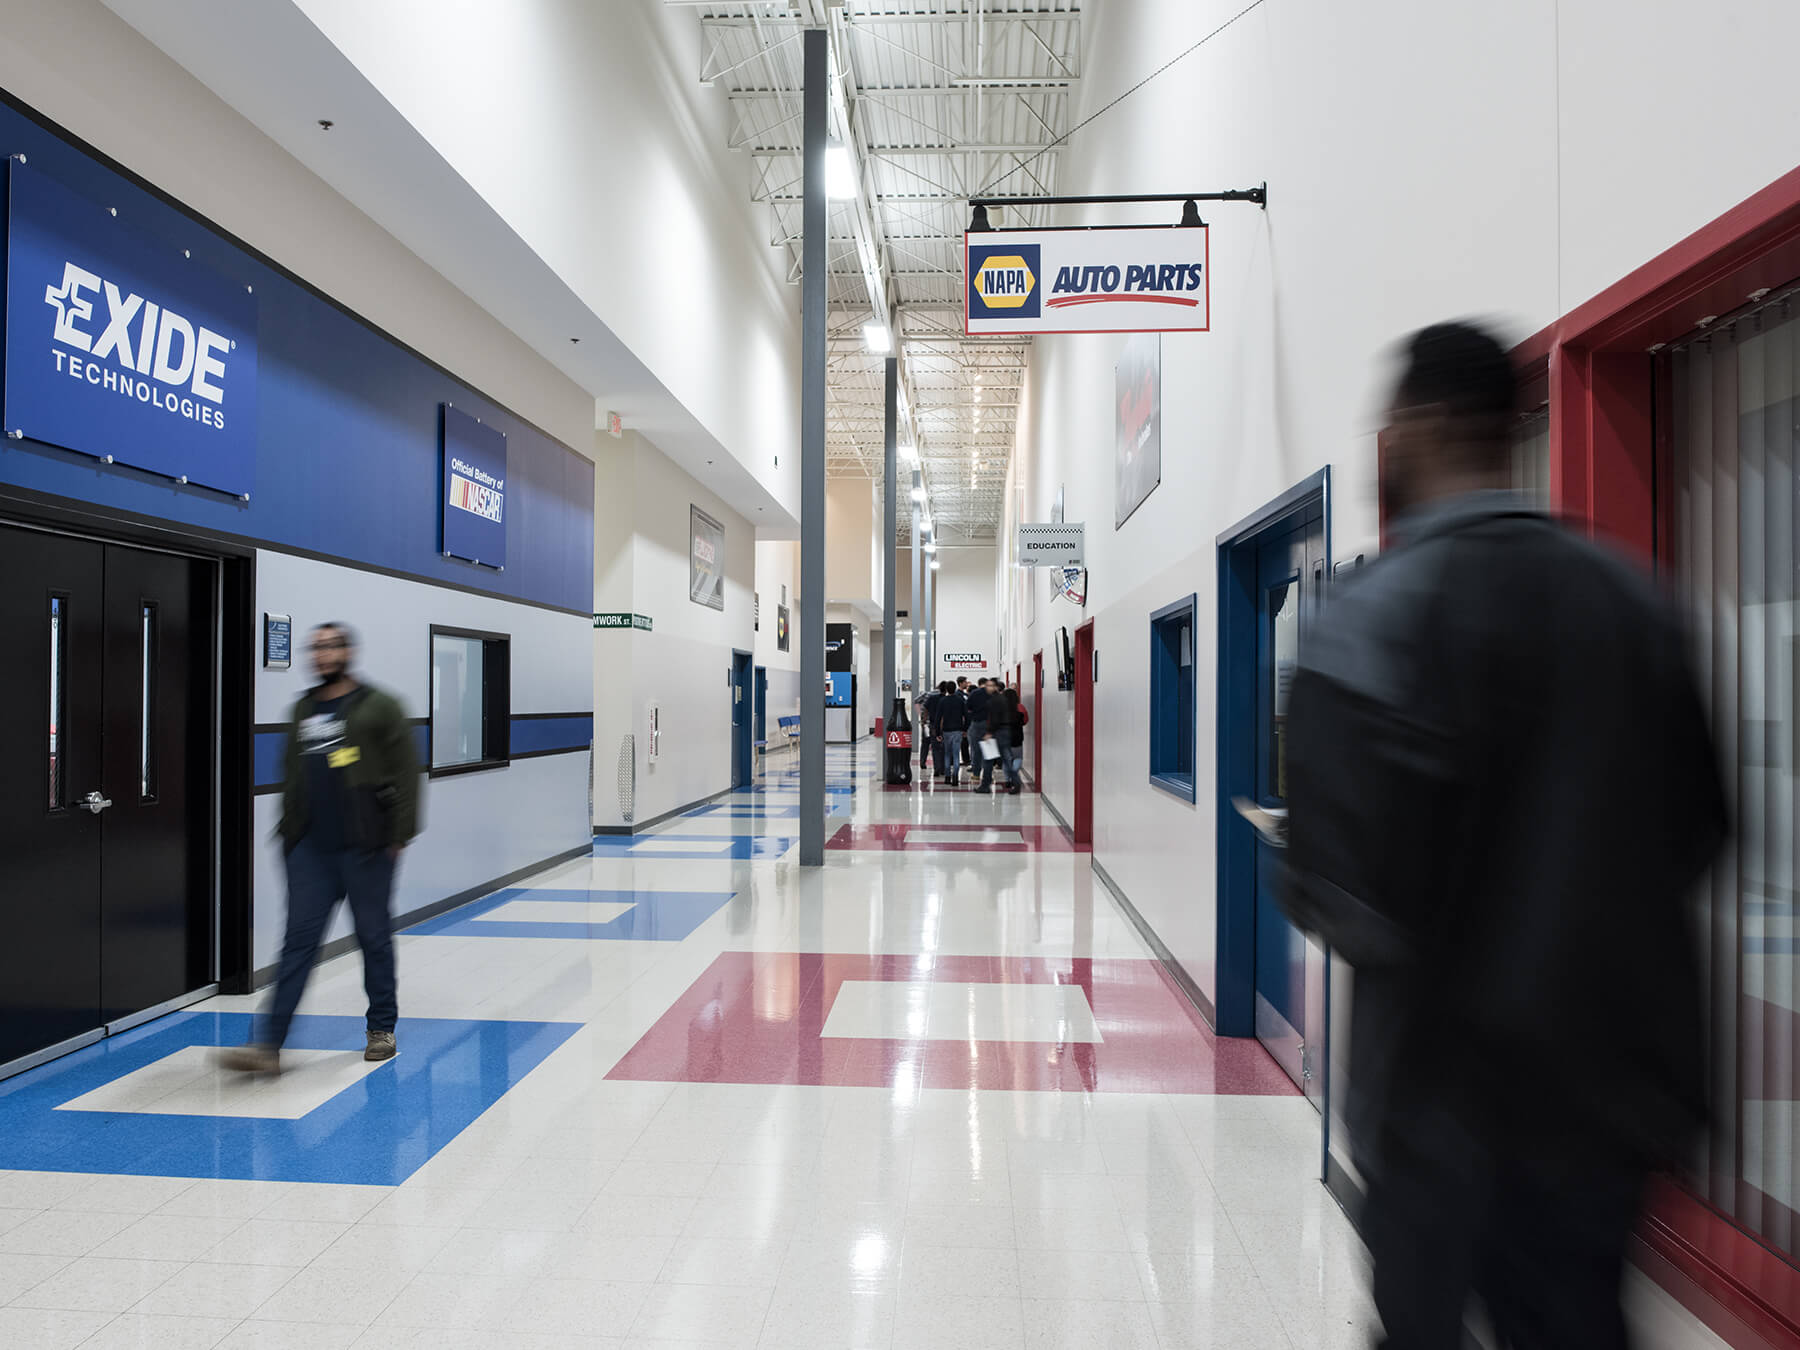 NASCAR-Technical-Institute-interior hallway with students